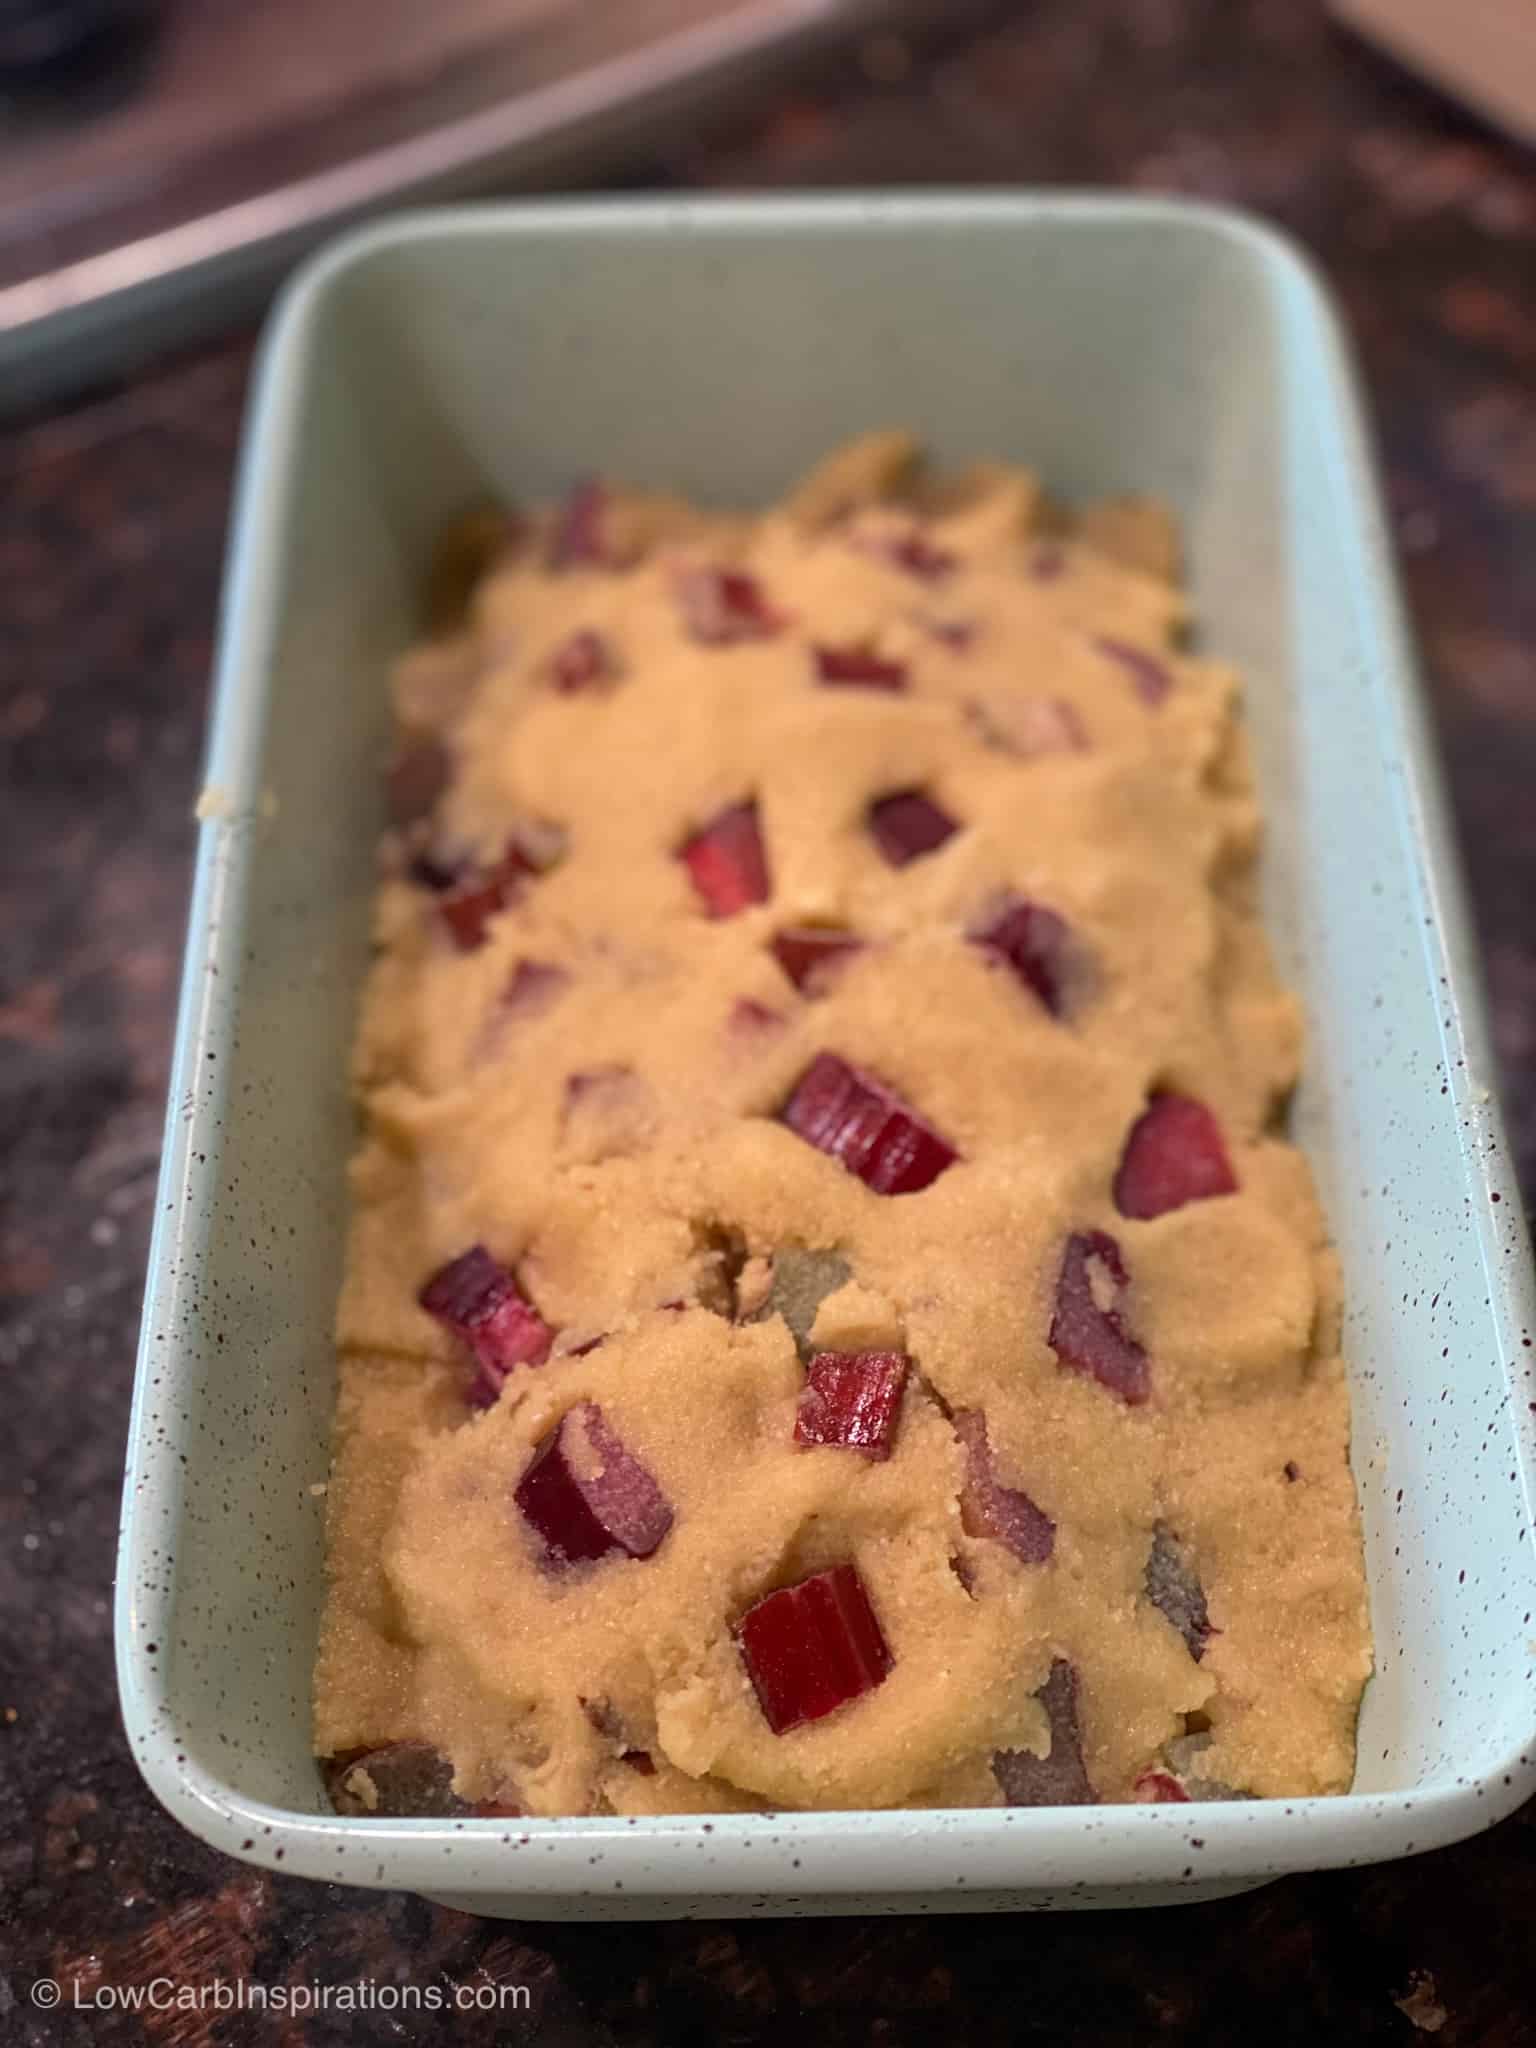 Keto Rhubarb Bread Recipe with a Glaze Topping before it's cooked